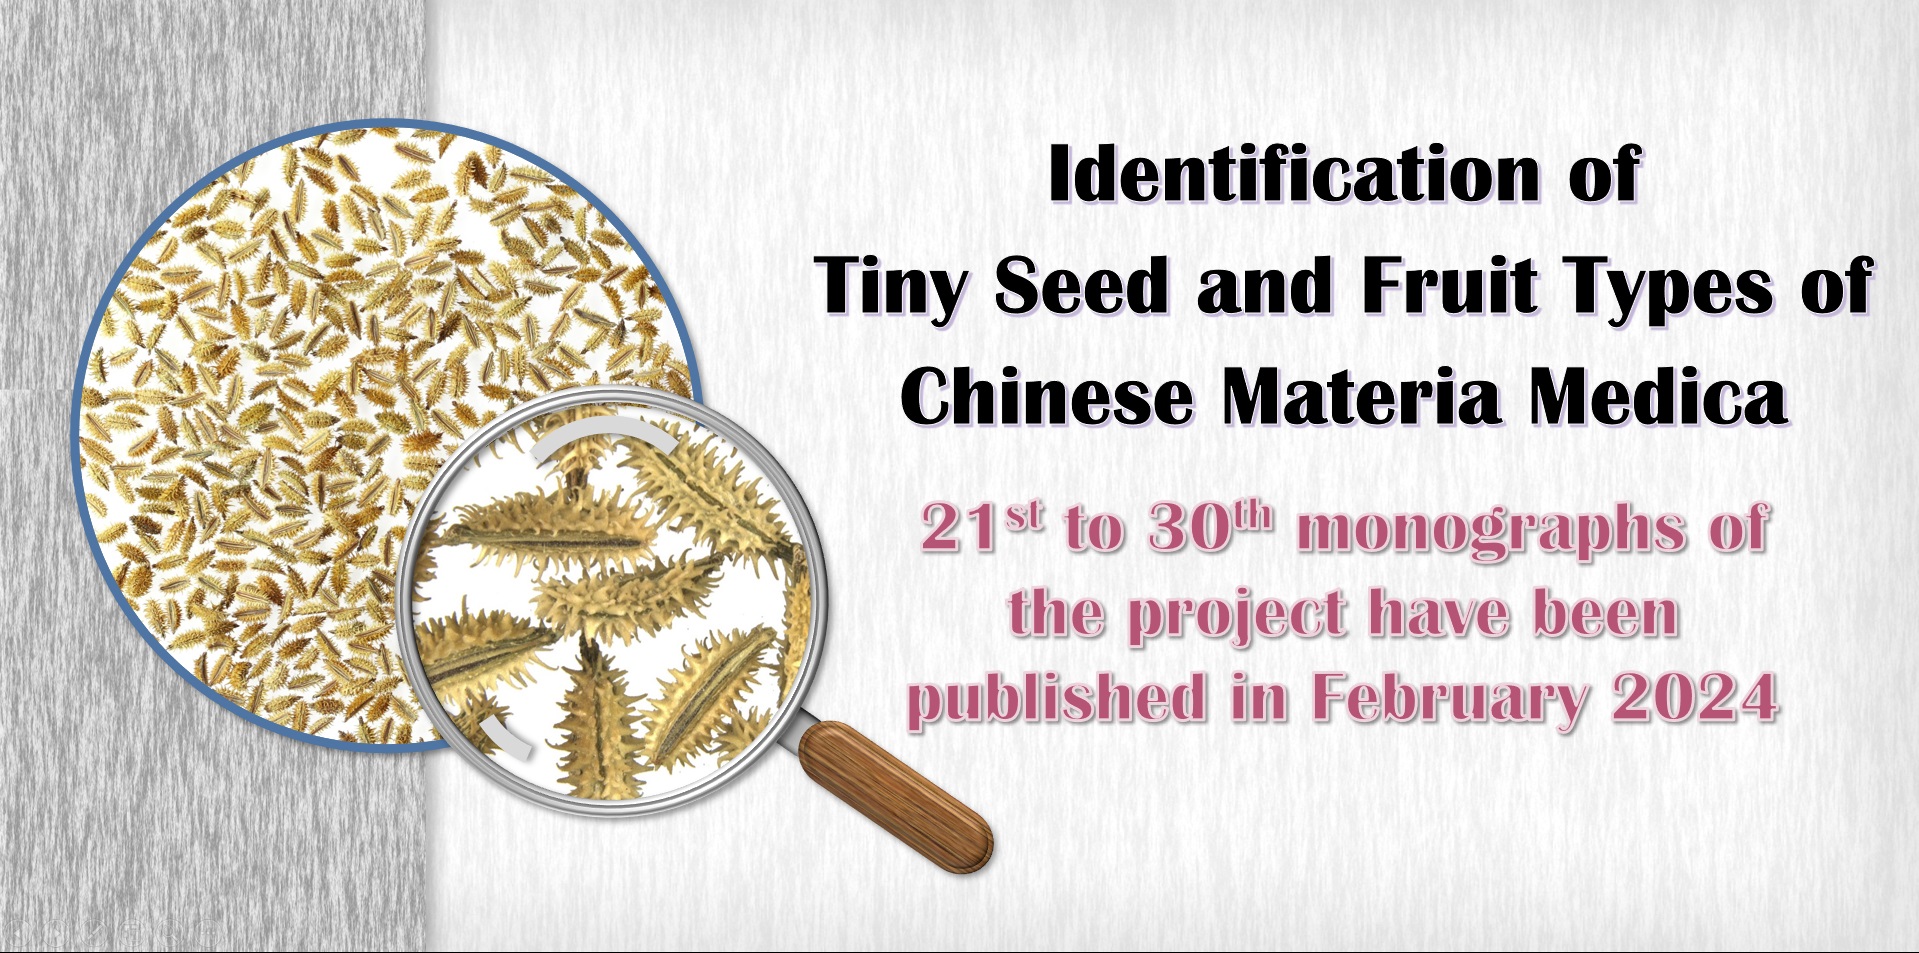 The 21st to 30th monographs of project “Identification of Tiny Seed and Fruit Types of Chinese Materia Medica” have been published in February 2024